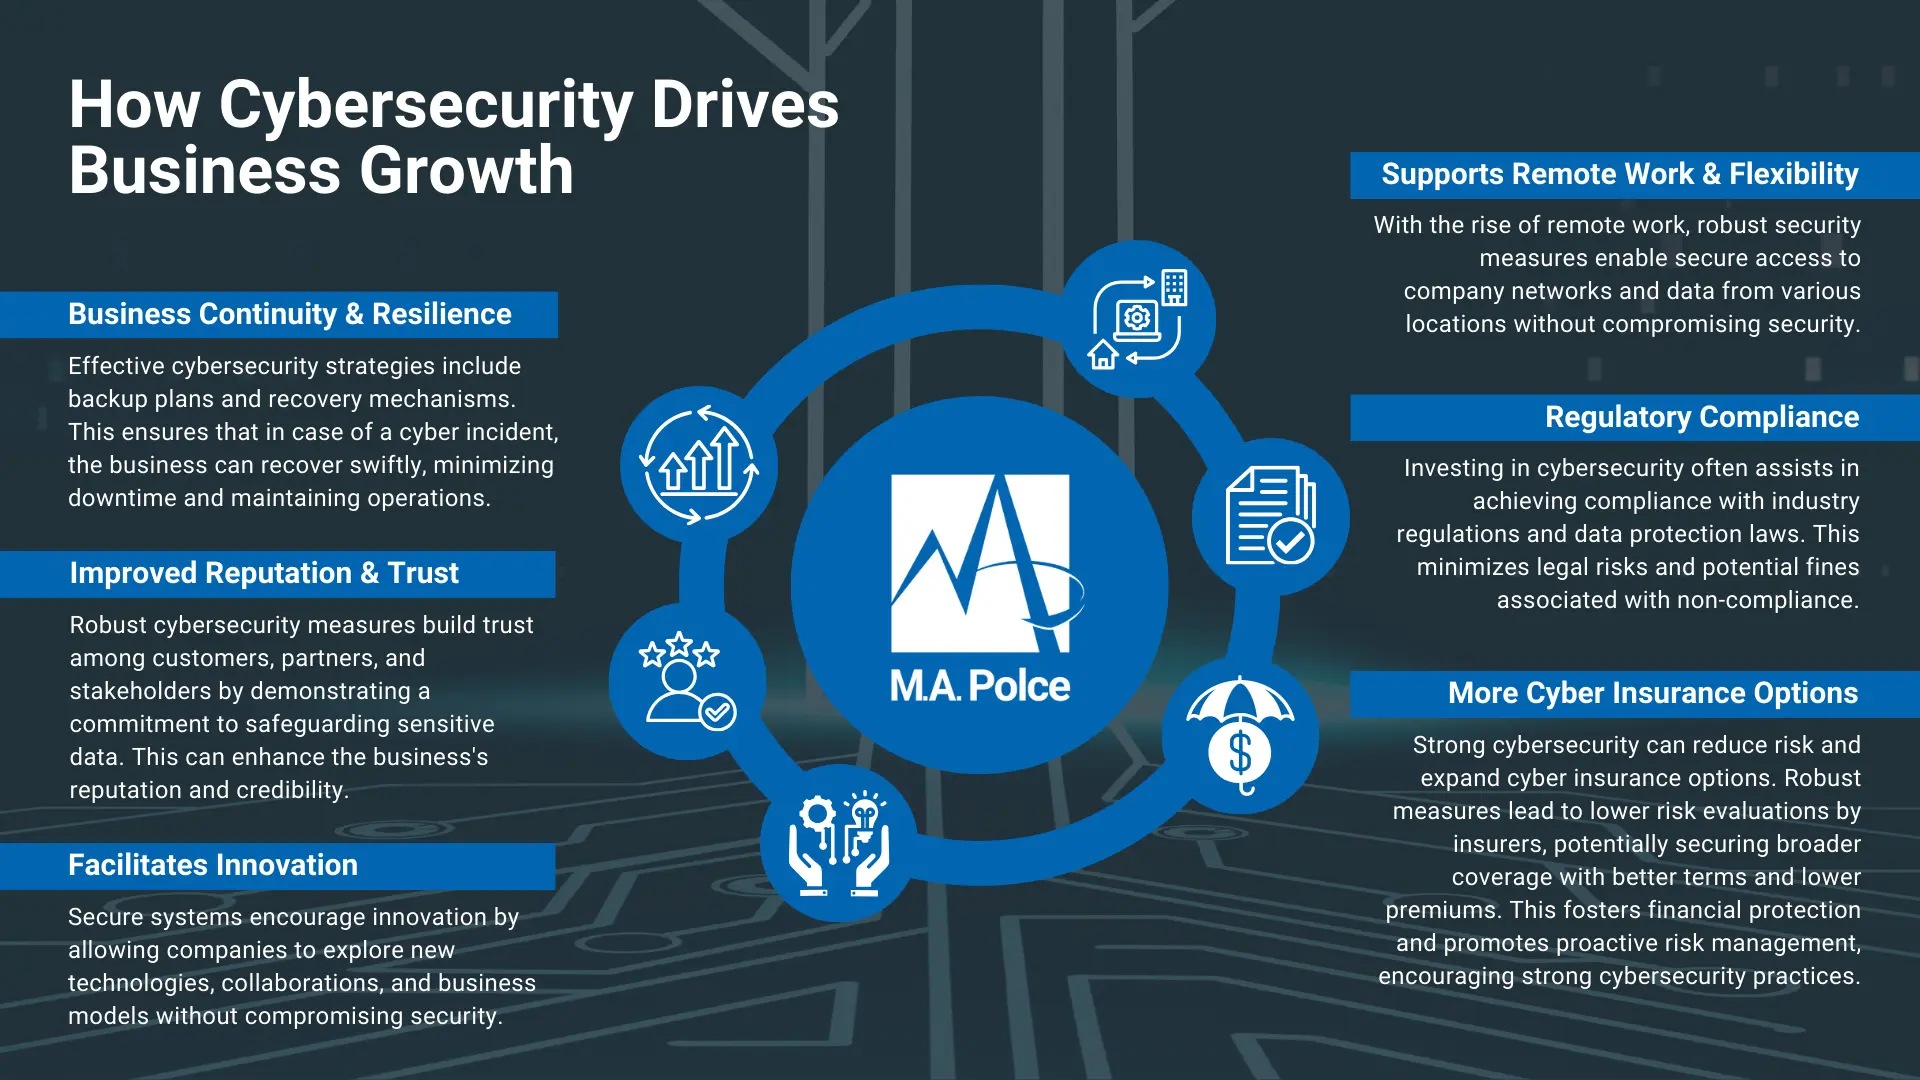 An image depicting the correlation between cyber security and business growth, highlighting the positive impact of cyber security measures.